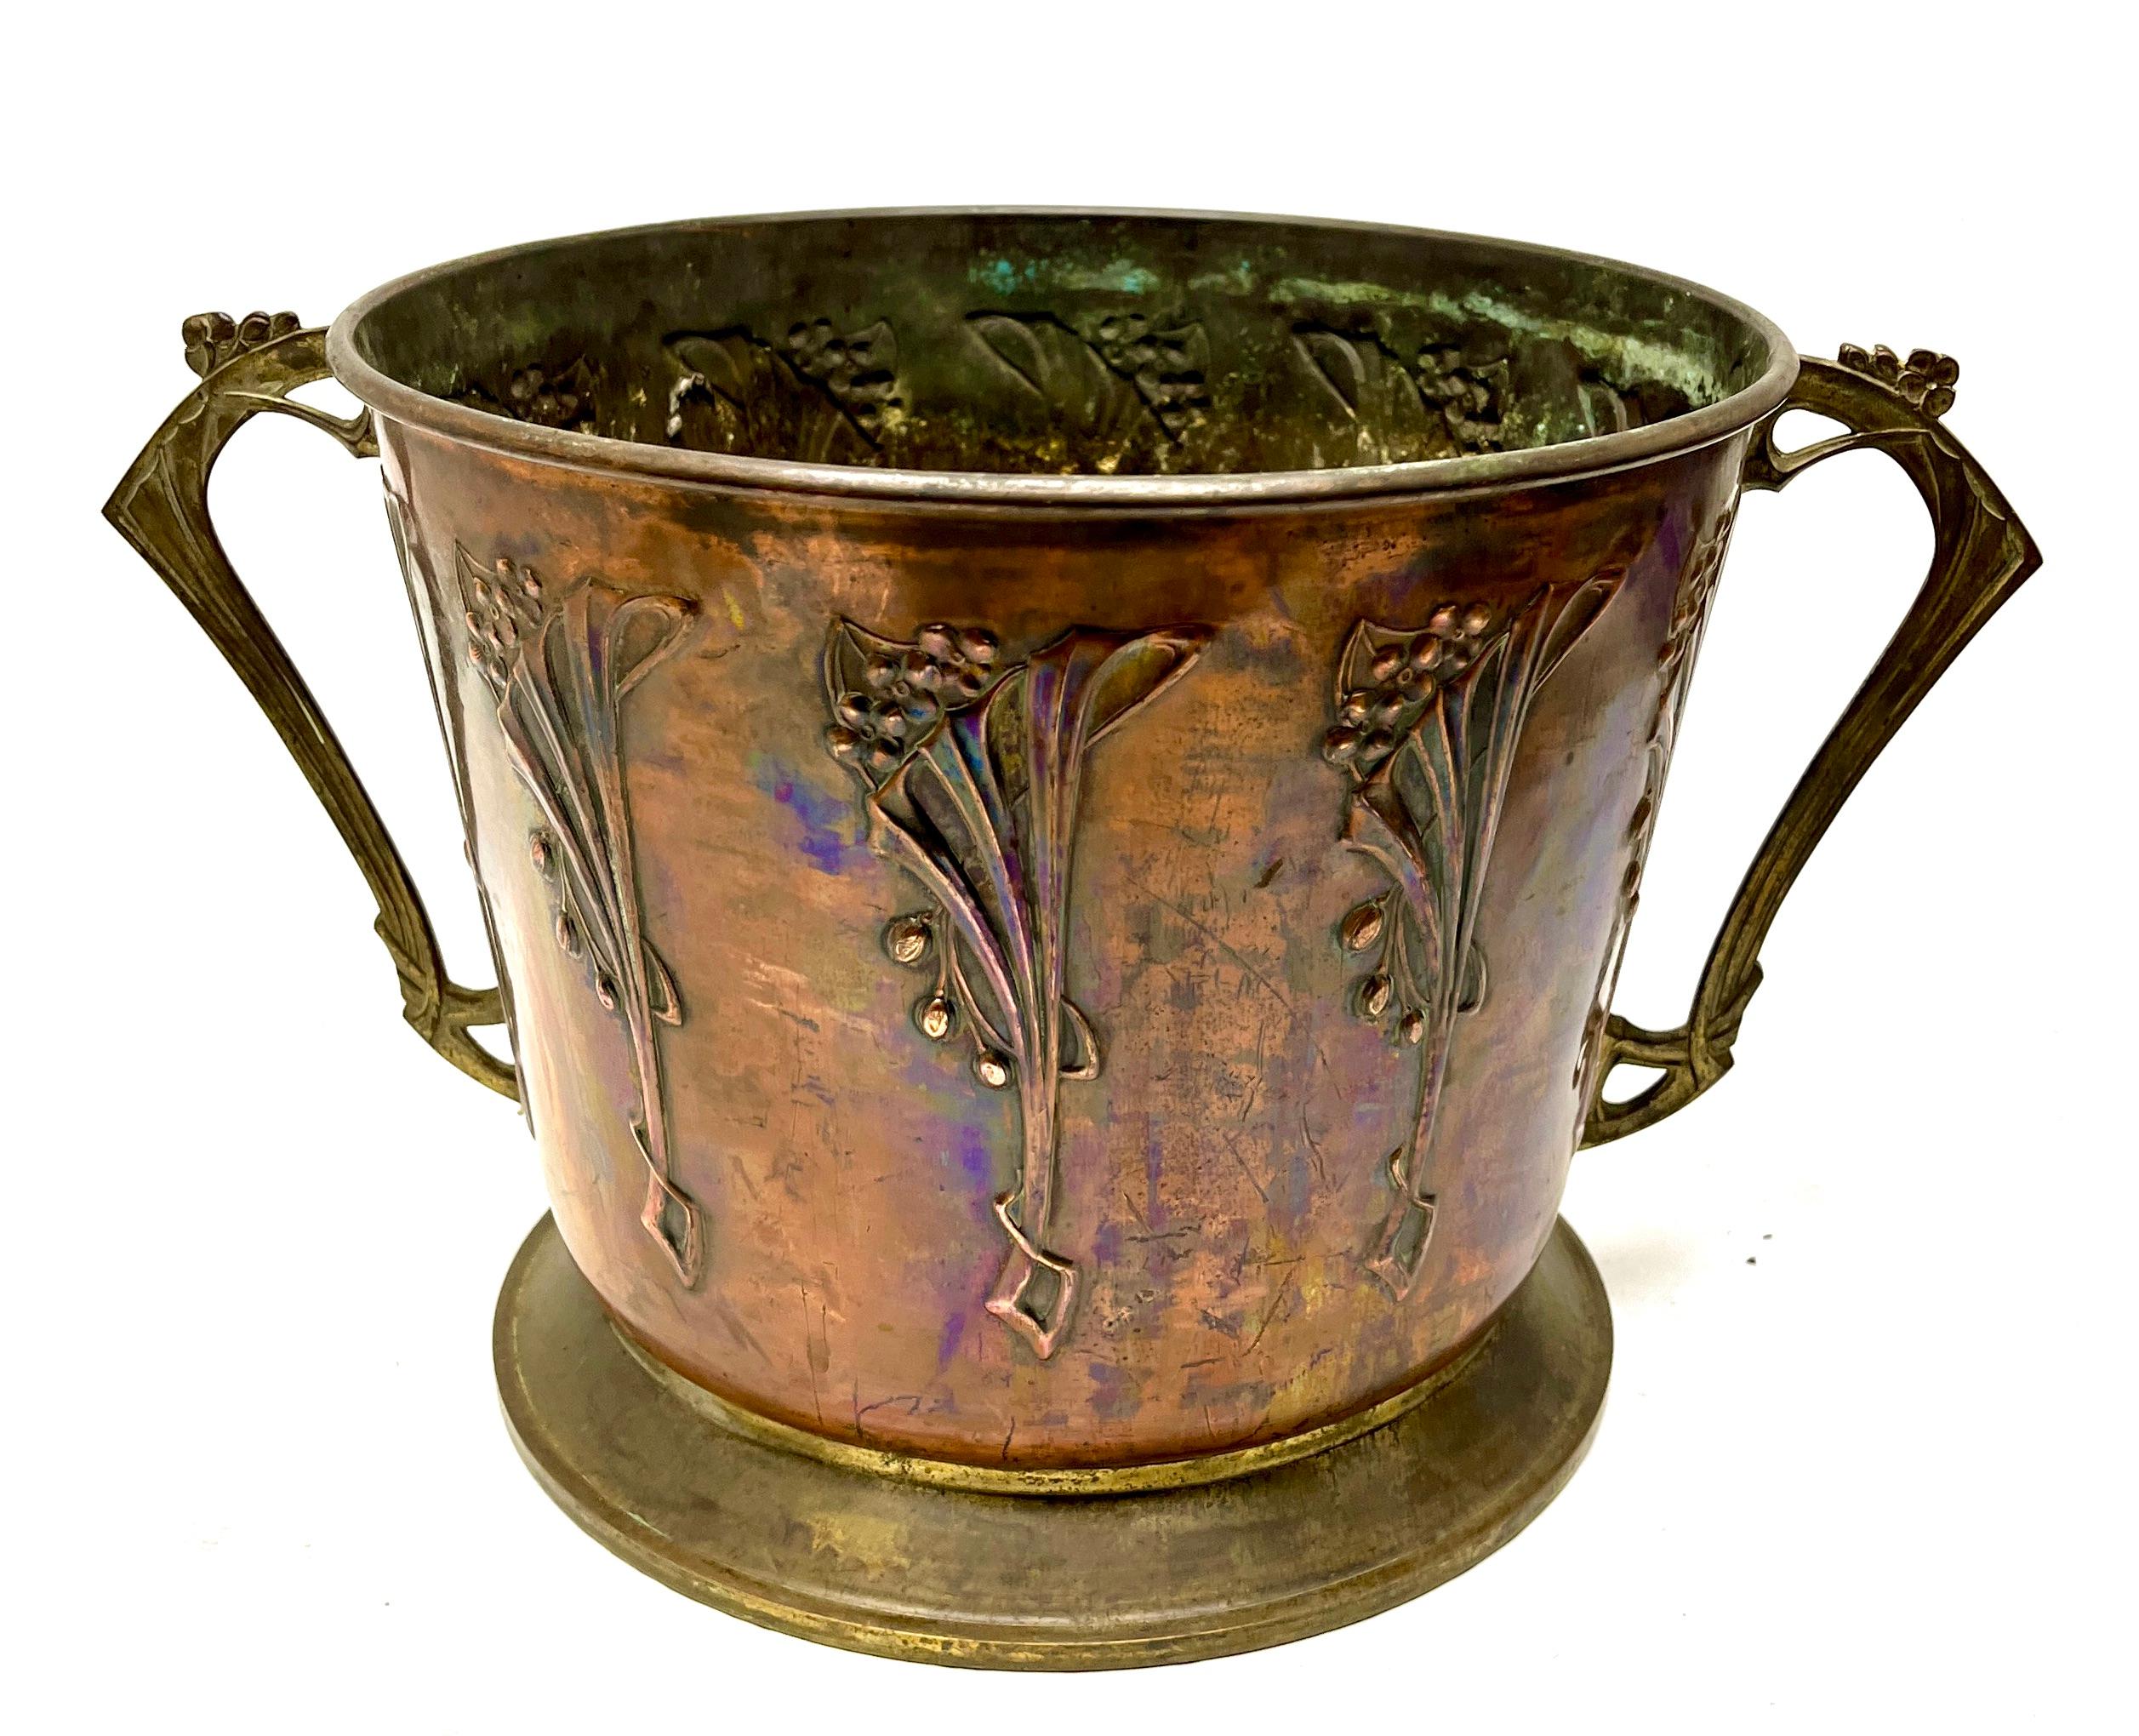 Style WMF Art Nouveau brass and copper flowerpot with levers and organic details
Hand-hammered out of one piece of copper.
Brass handles with Organic style details

With original Patina on all the parts.
We Prefer to sell our items in